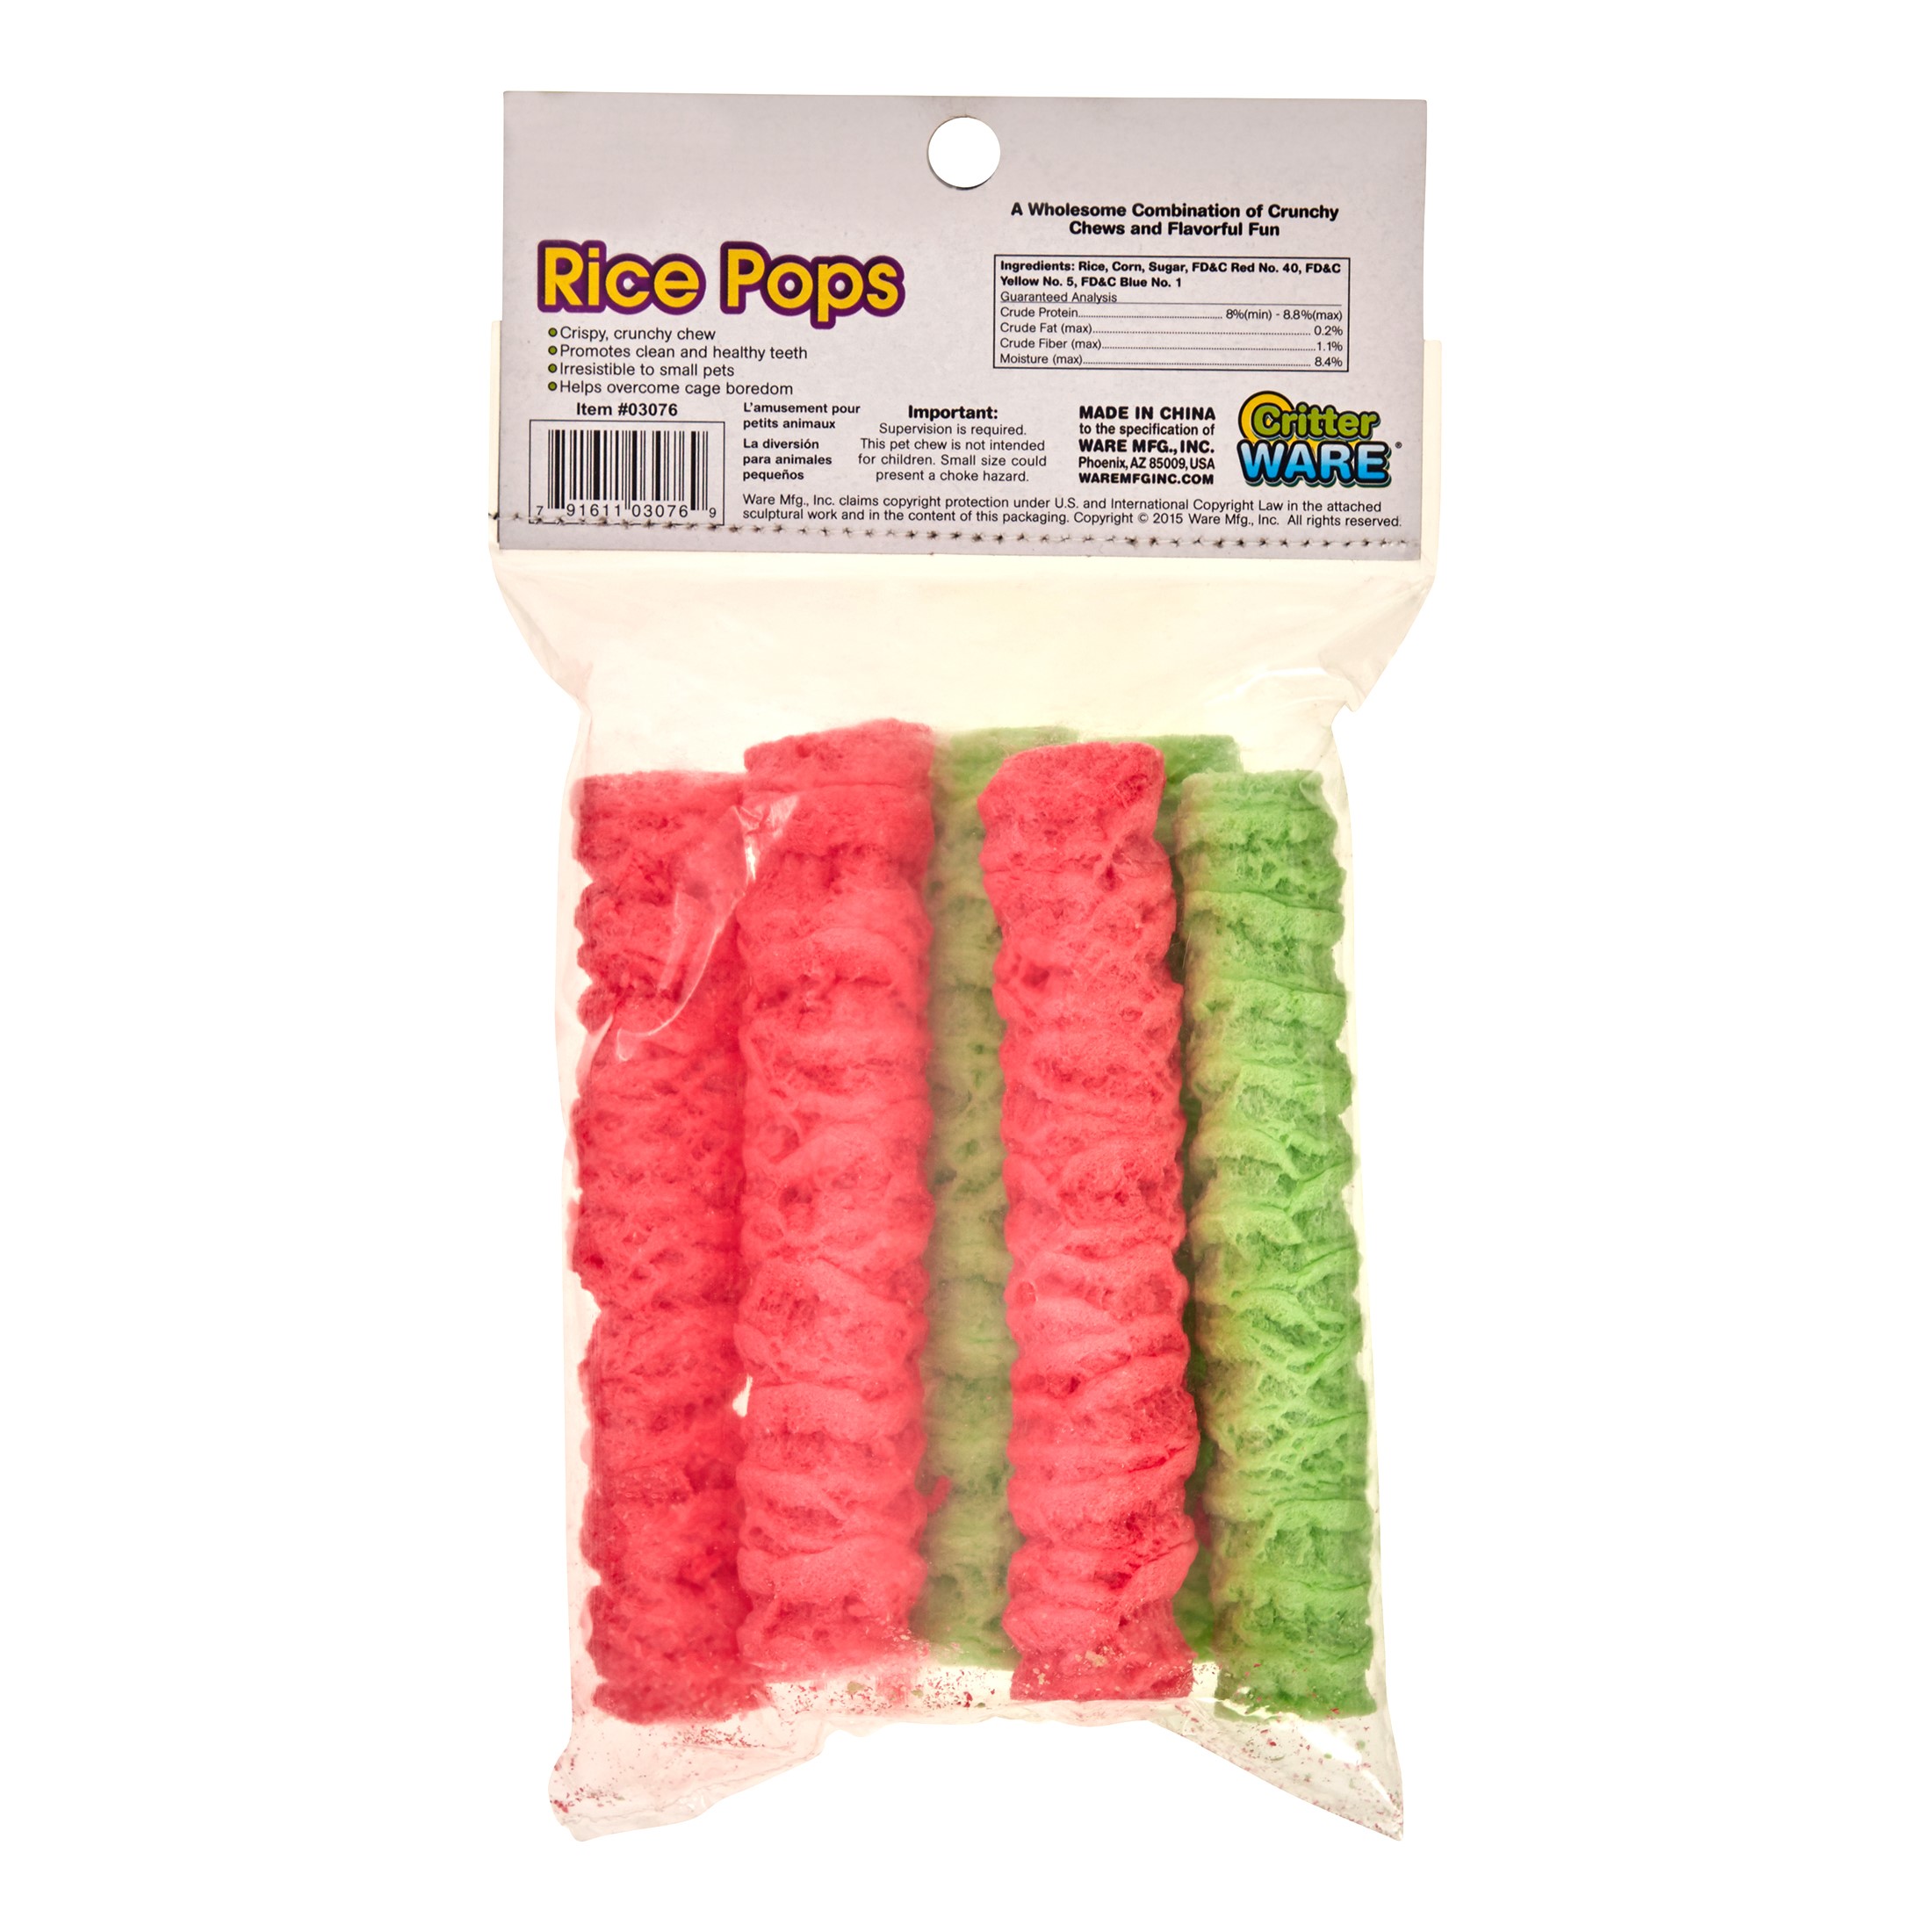 WARE Large Rice Pops Small Animal Treats, Pack of 6 (Pack of 6) - image 2 of 3